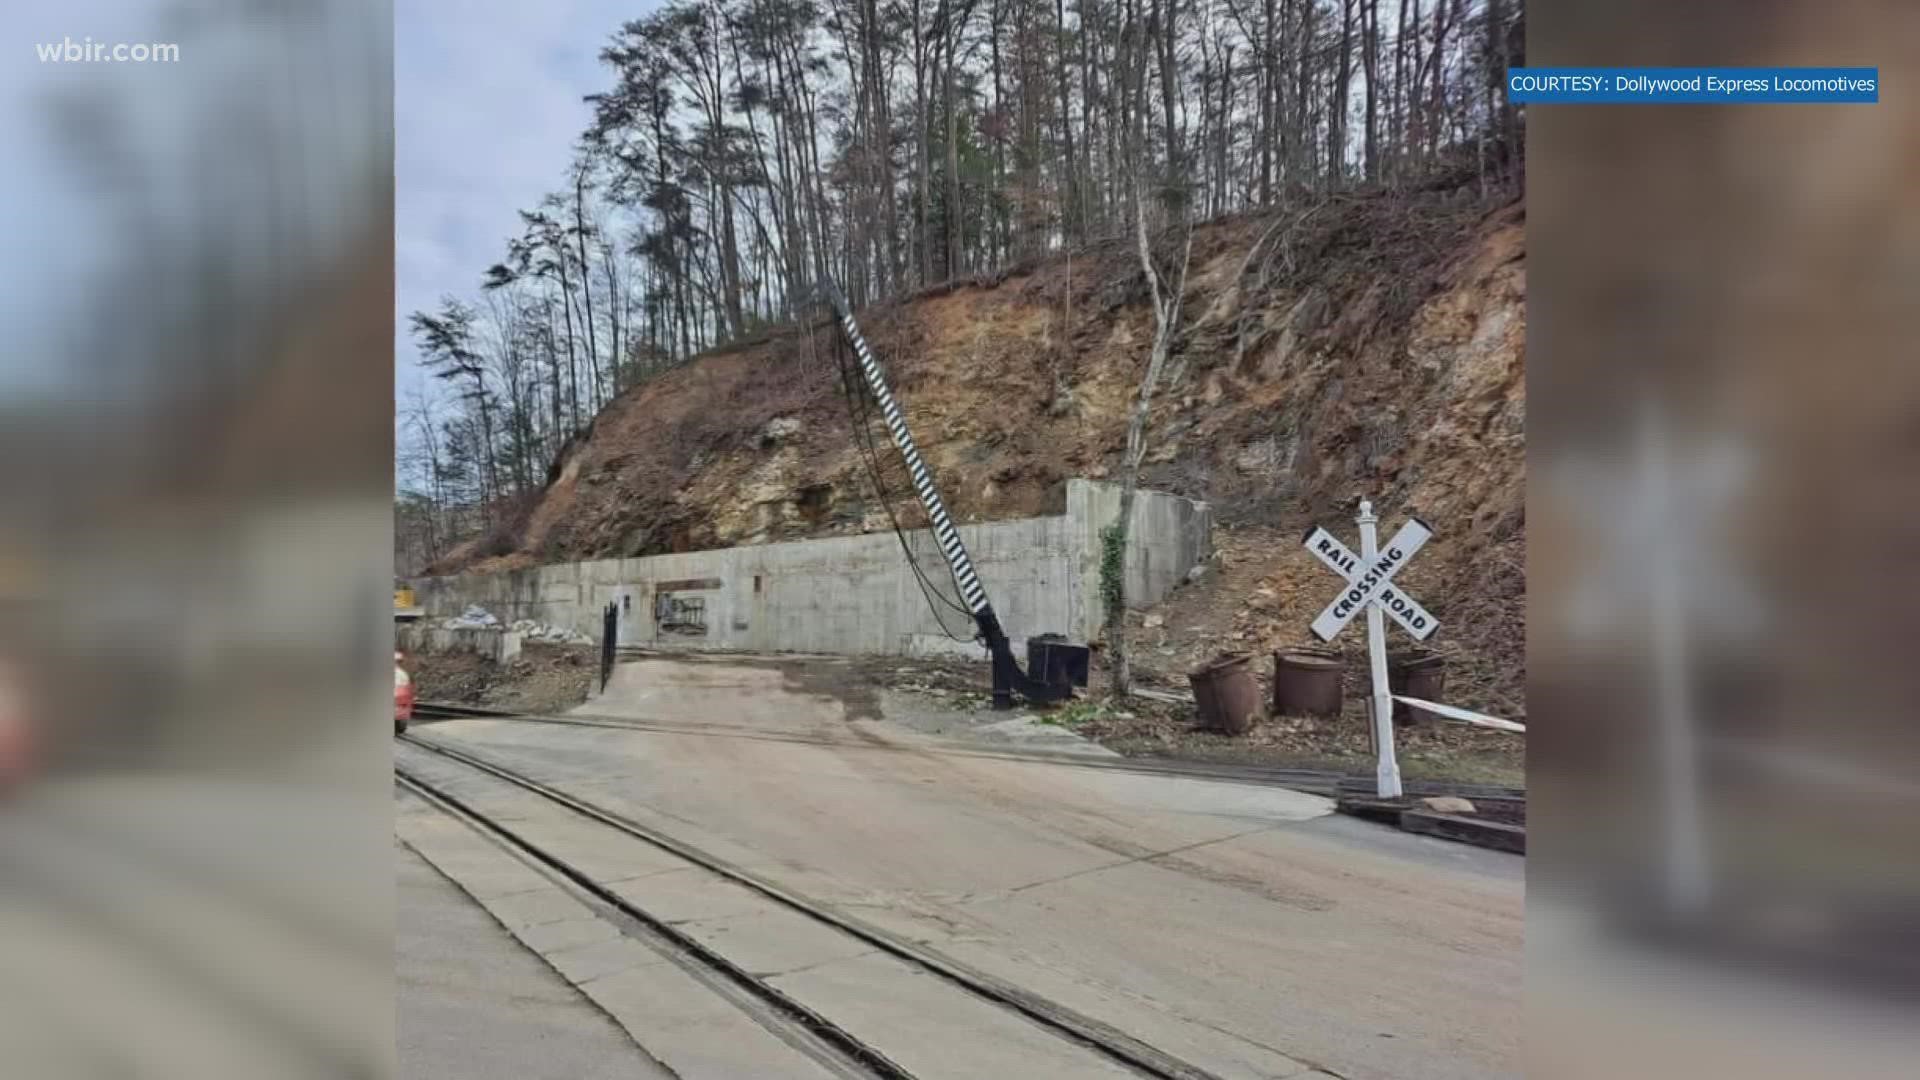 Dollywood says the removal of the tunnel that connected lower Craftsman's Valley to the Village was a necessary project.